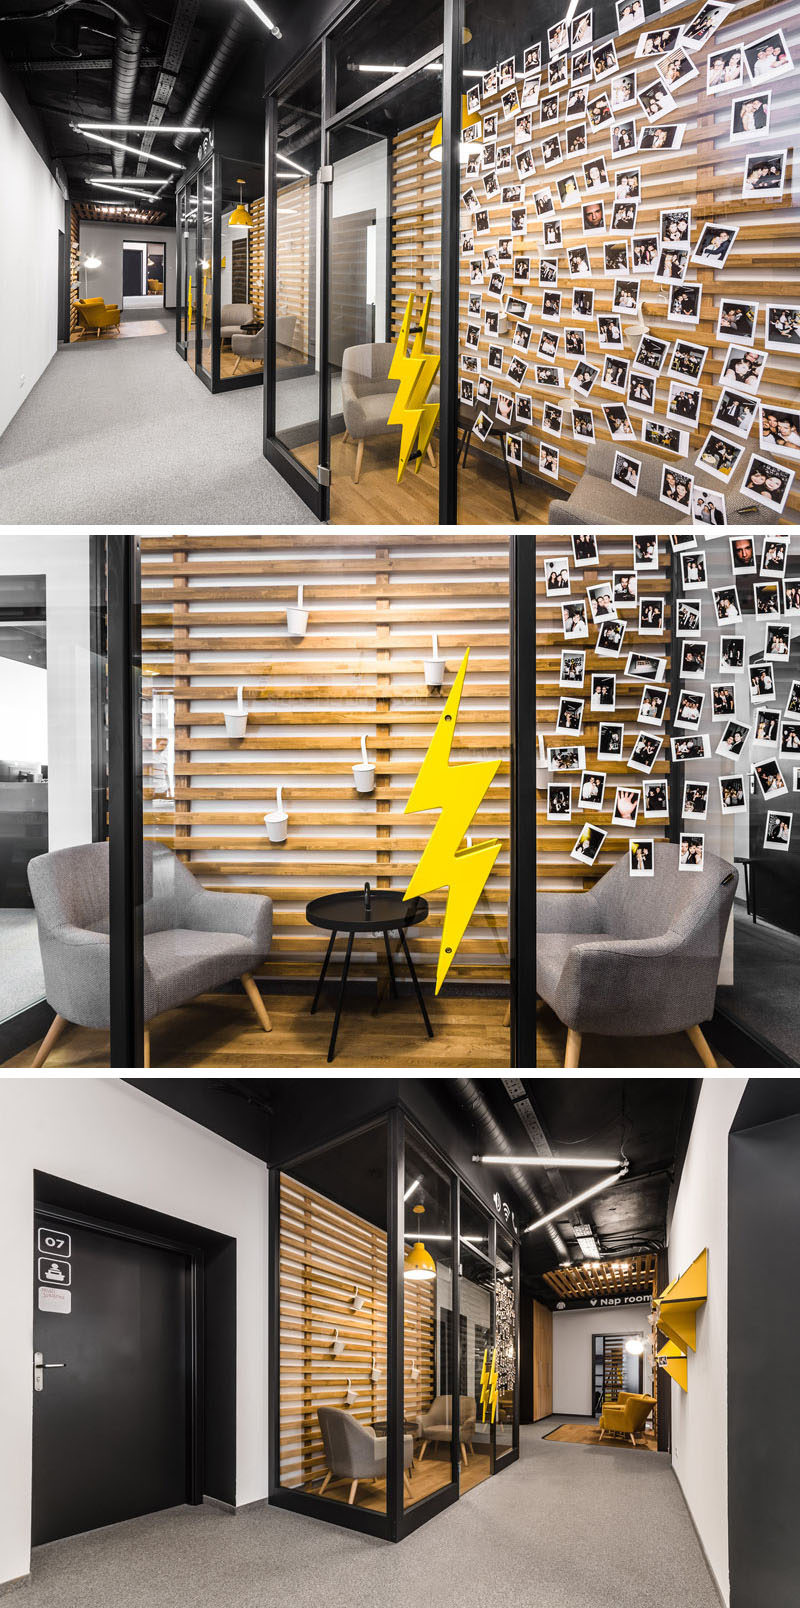 In this modern office, glass enclosed rooms allow for fun artwork or photos to be attached to the glass, and the wood slats and flooring match the other seating areas in the hallway.